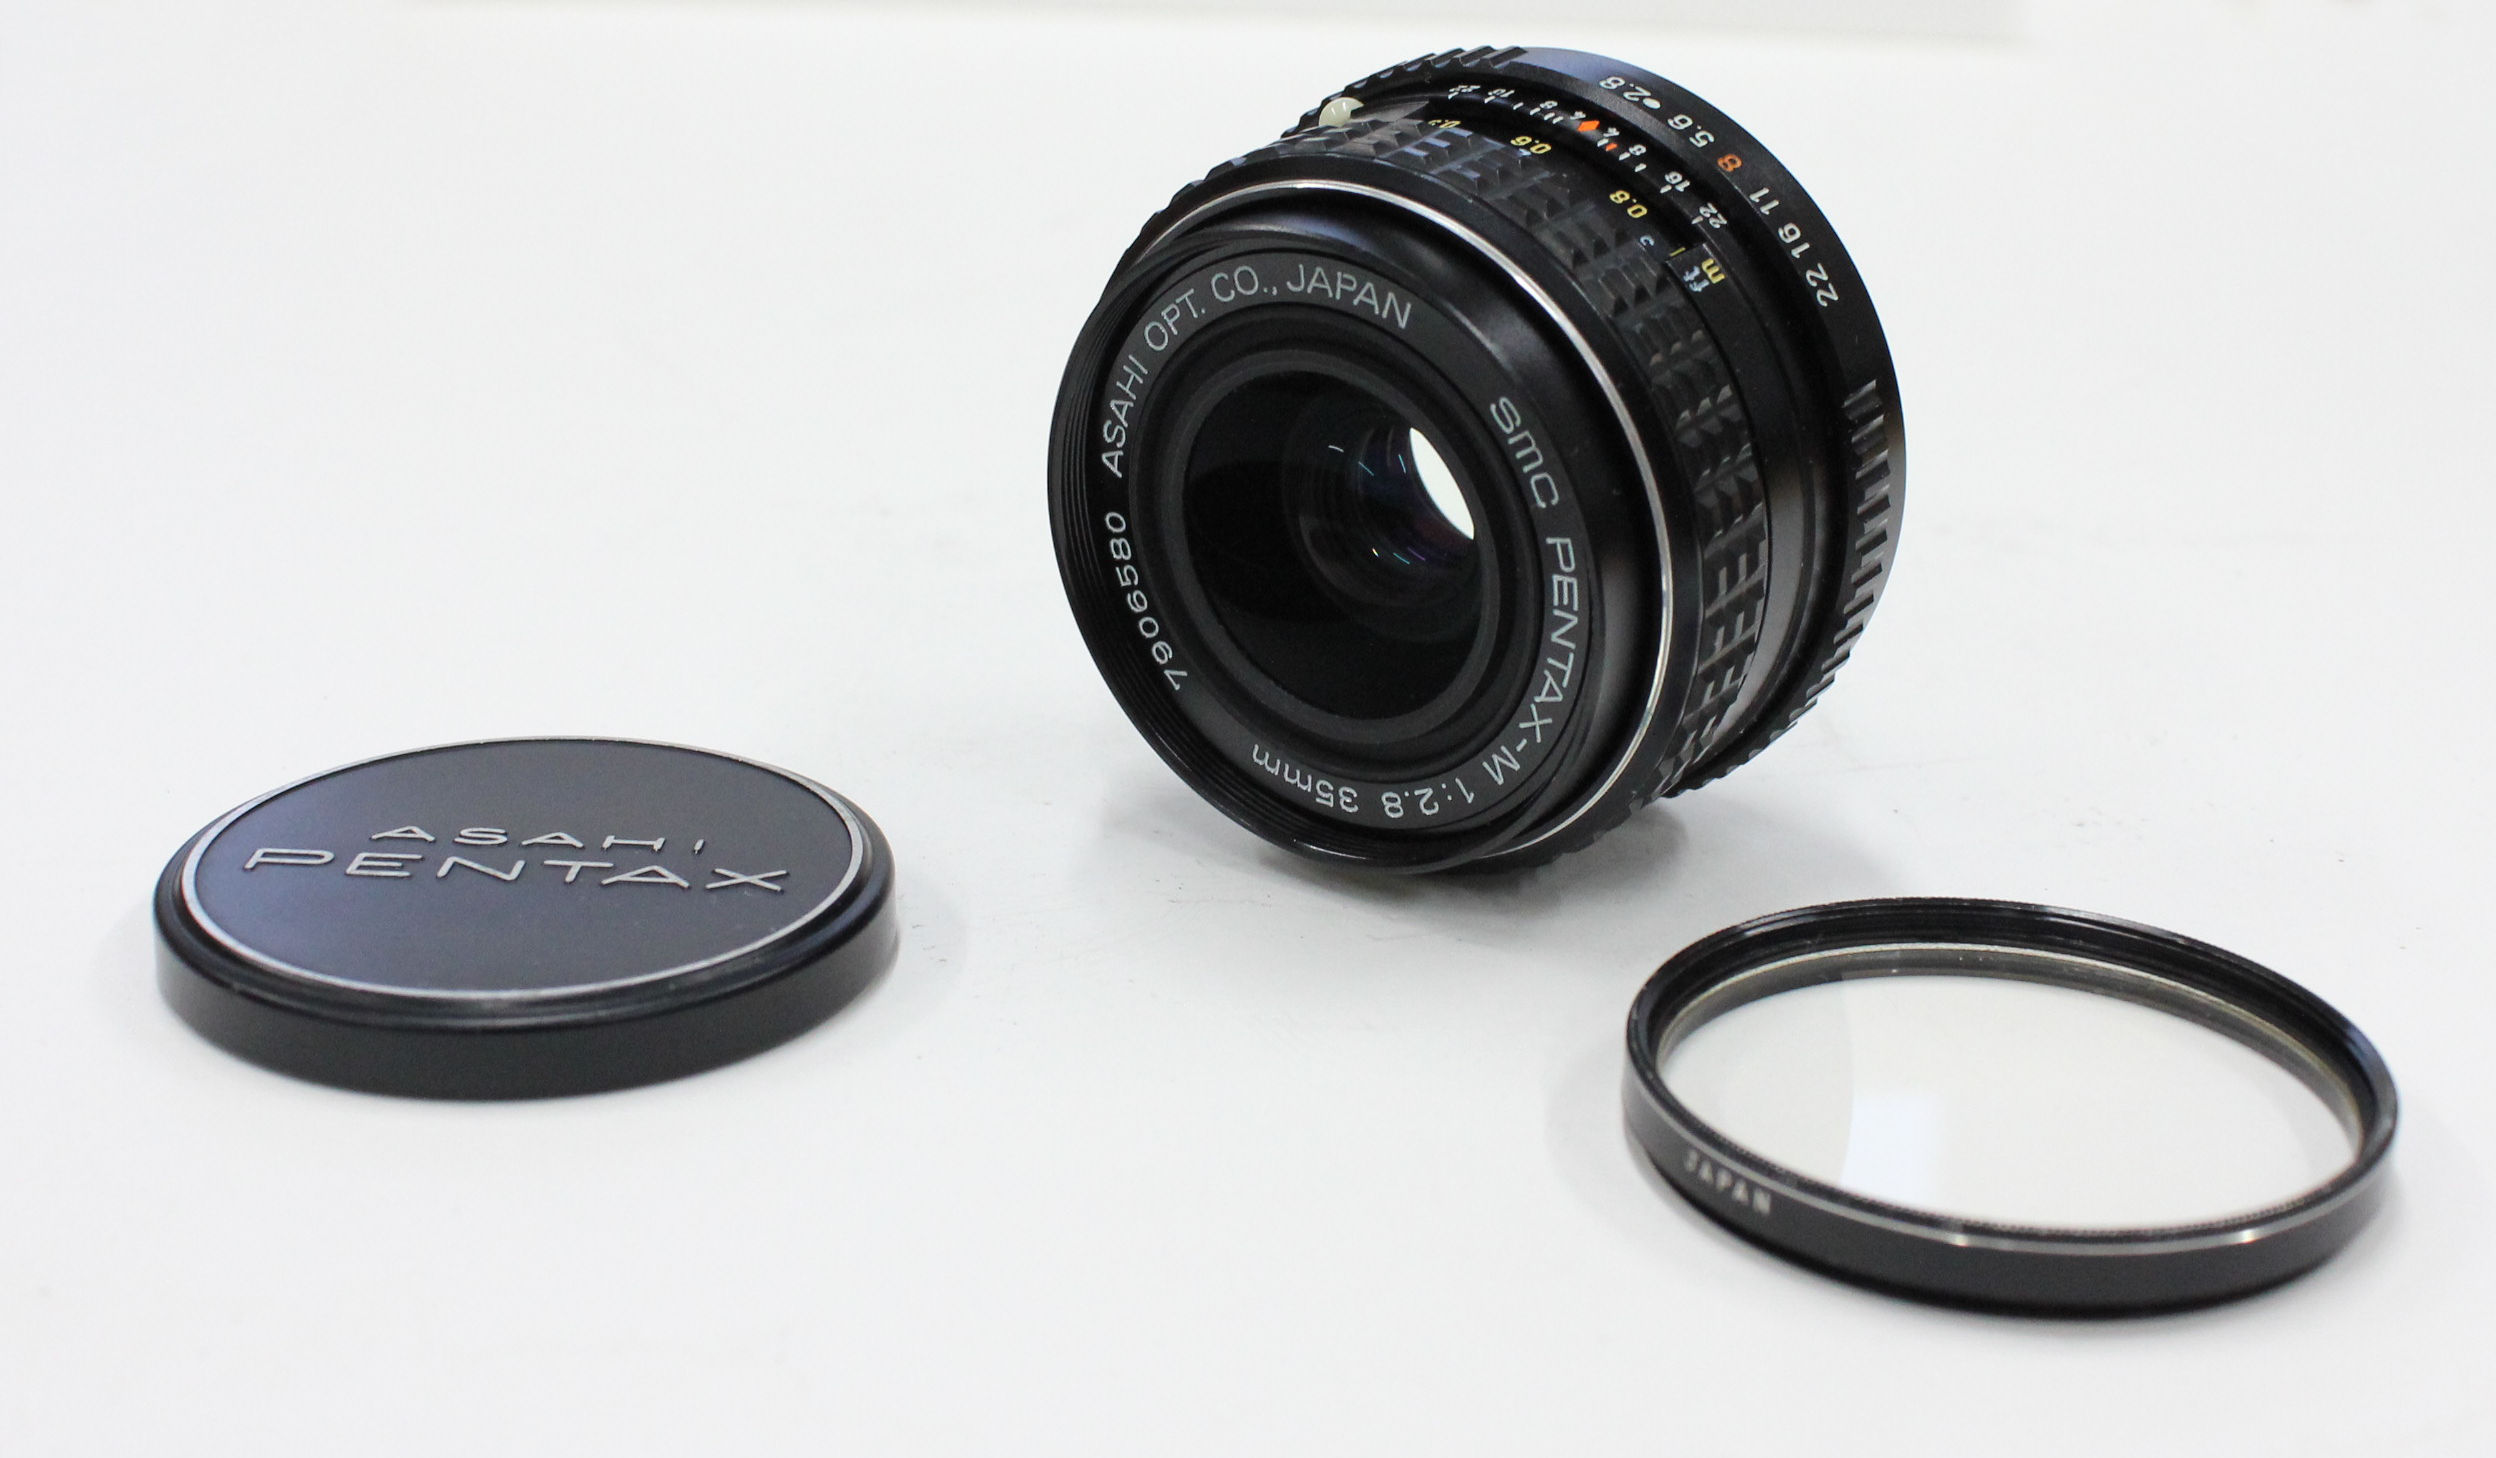 Japan Used Camera Shop | [Near Mint] SMC Pentax-M 35mm F/2.8 MF Lens with Filter from japan